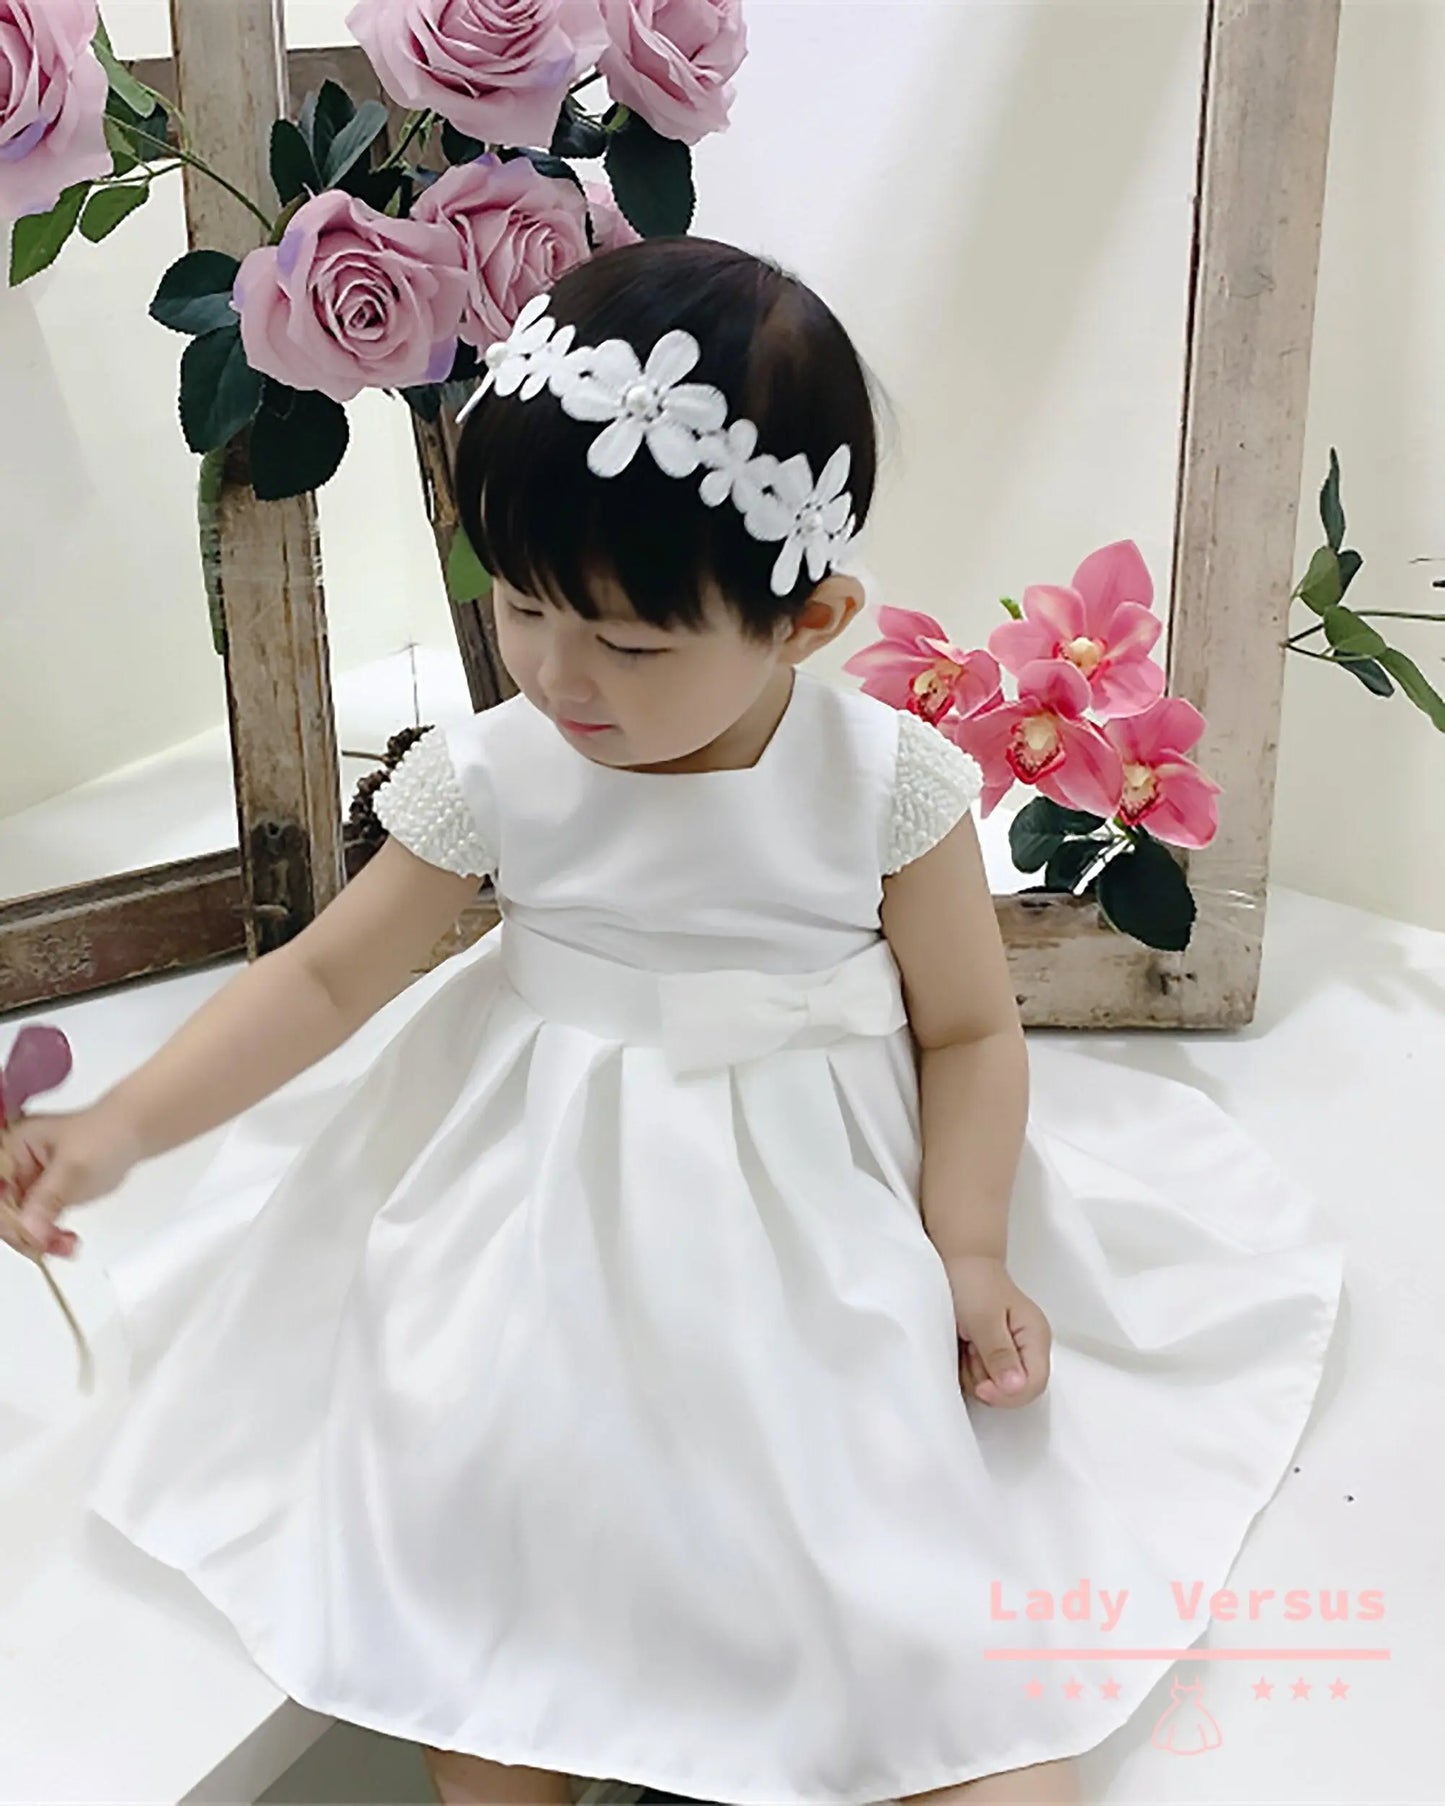 White Baby Girl Baptism Dress / Newborn Baby Girl Christening Gown/ Baby Girl Baptism Outfit/ birthday princess gown / baby white dress Lady Versus